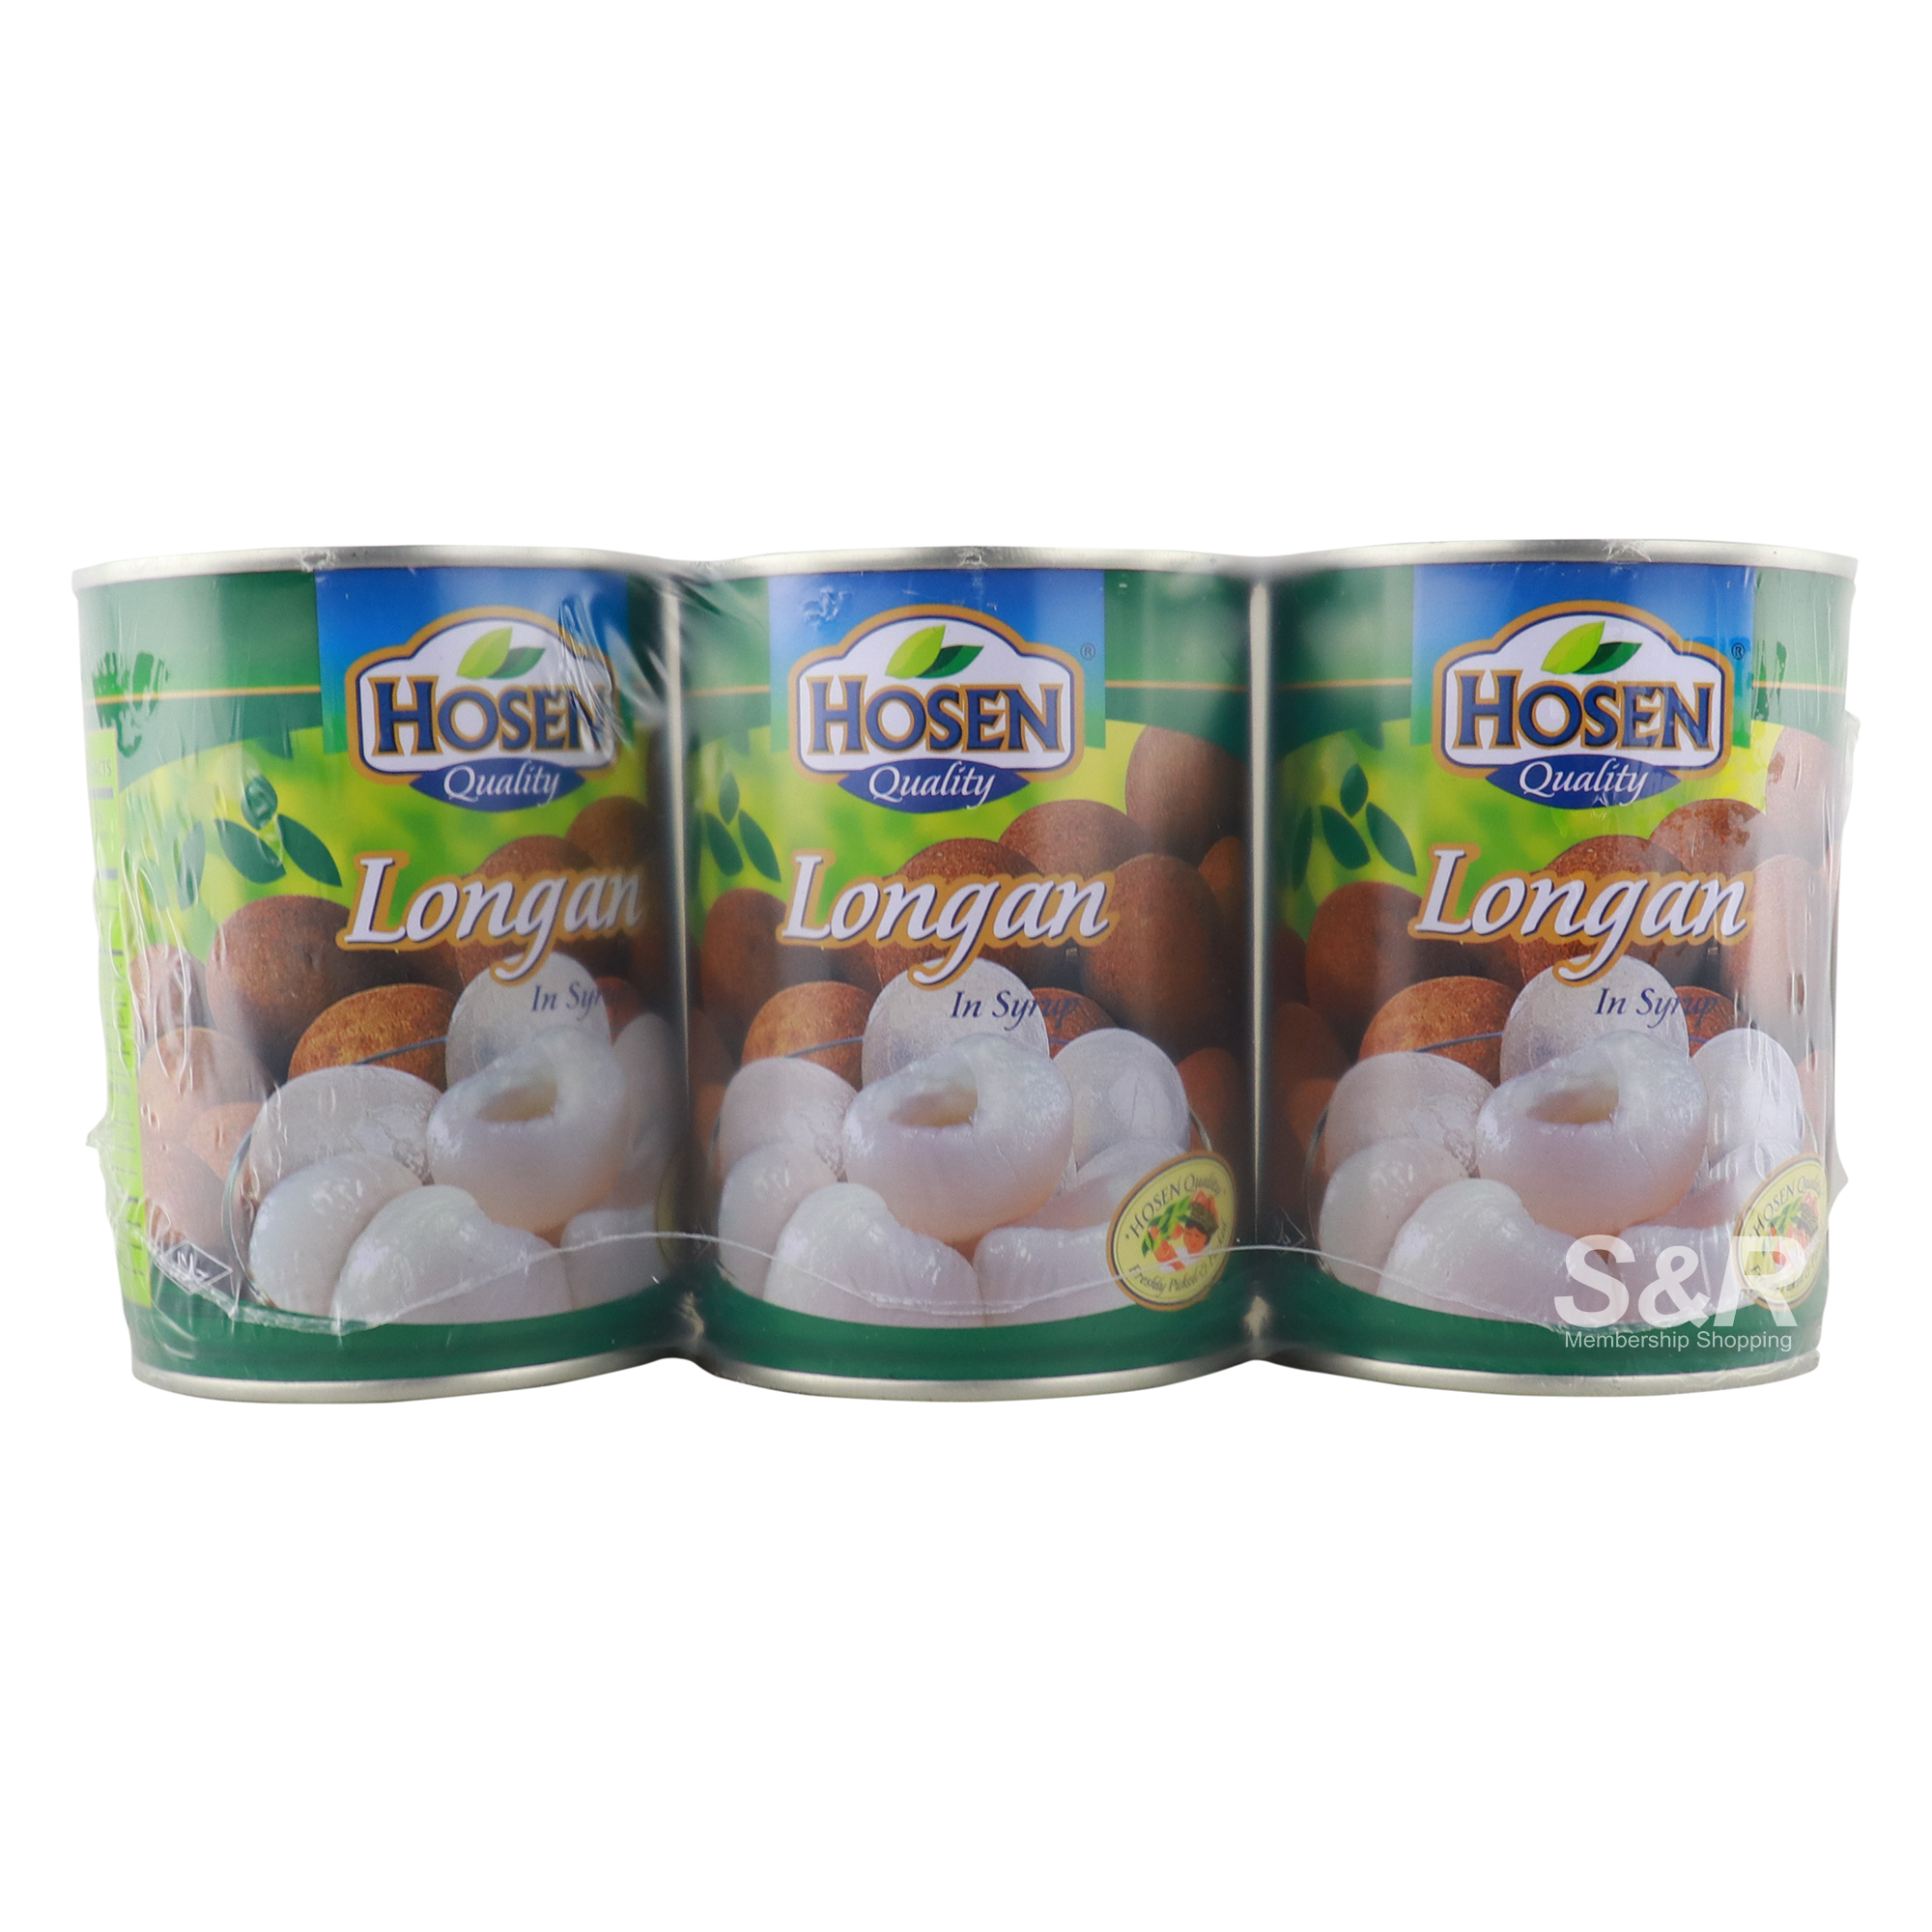 Hosen Quality Longan in Syrup 3 cans